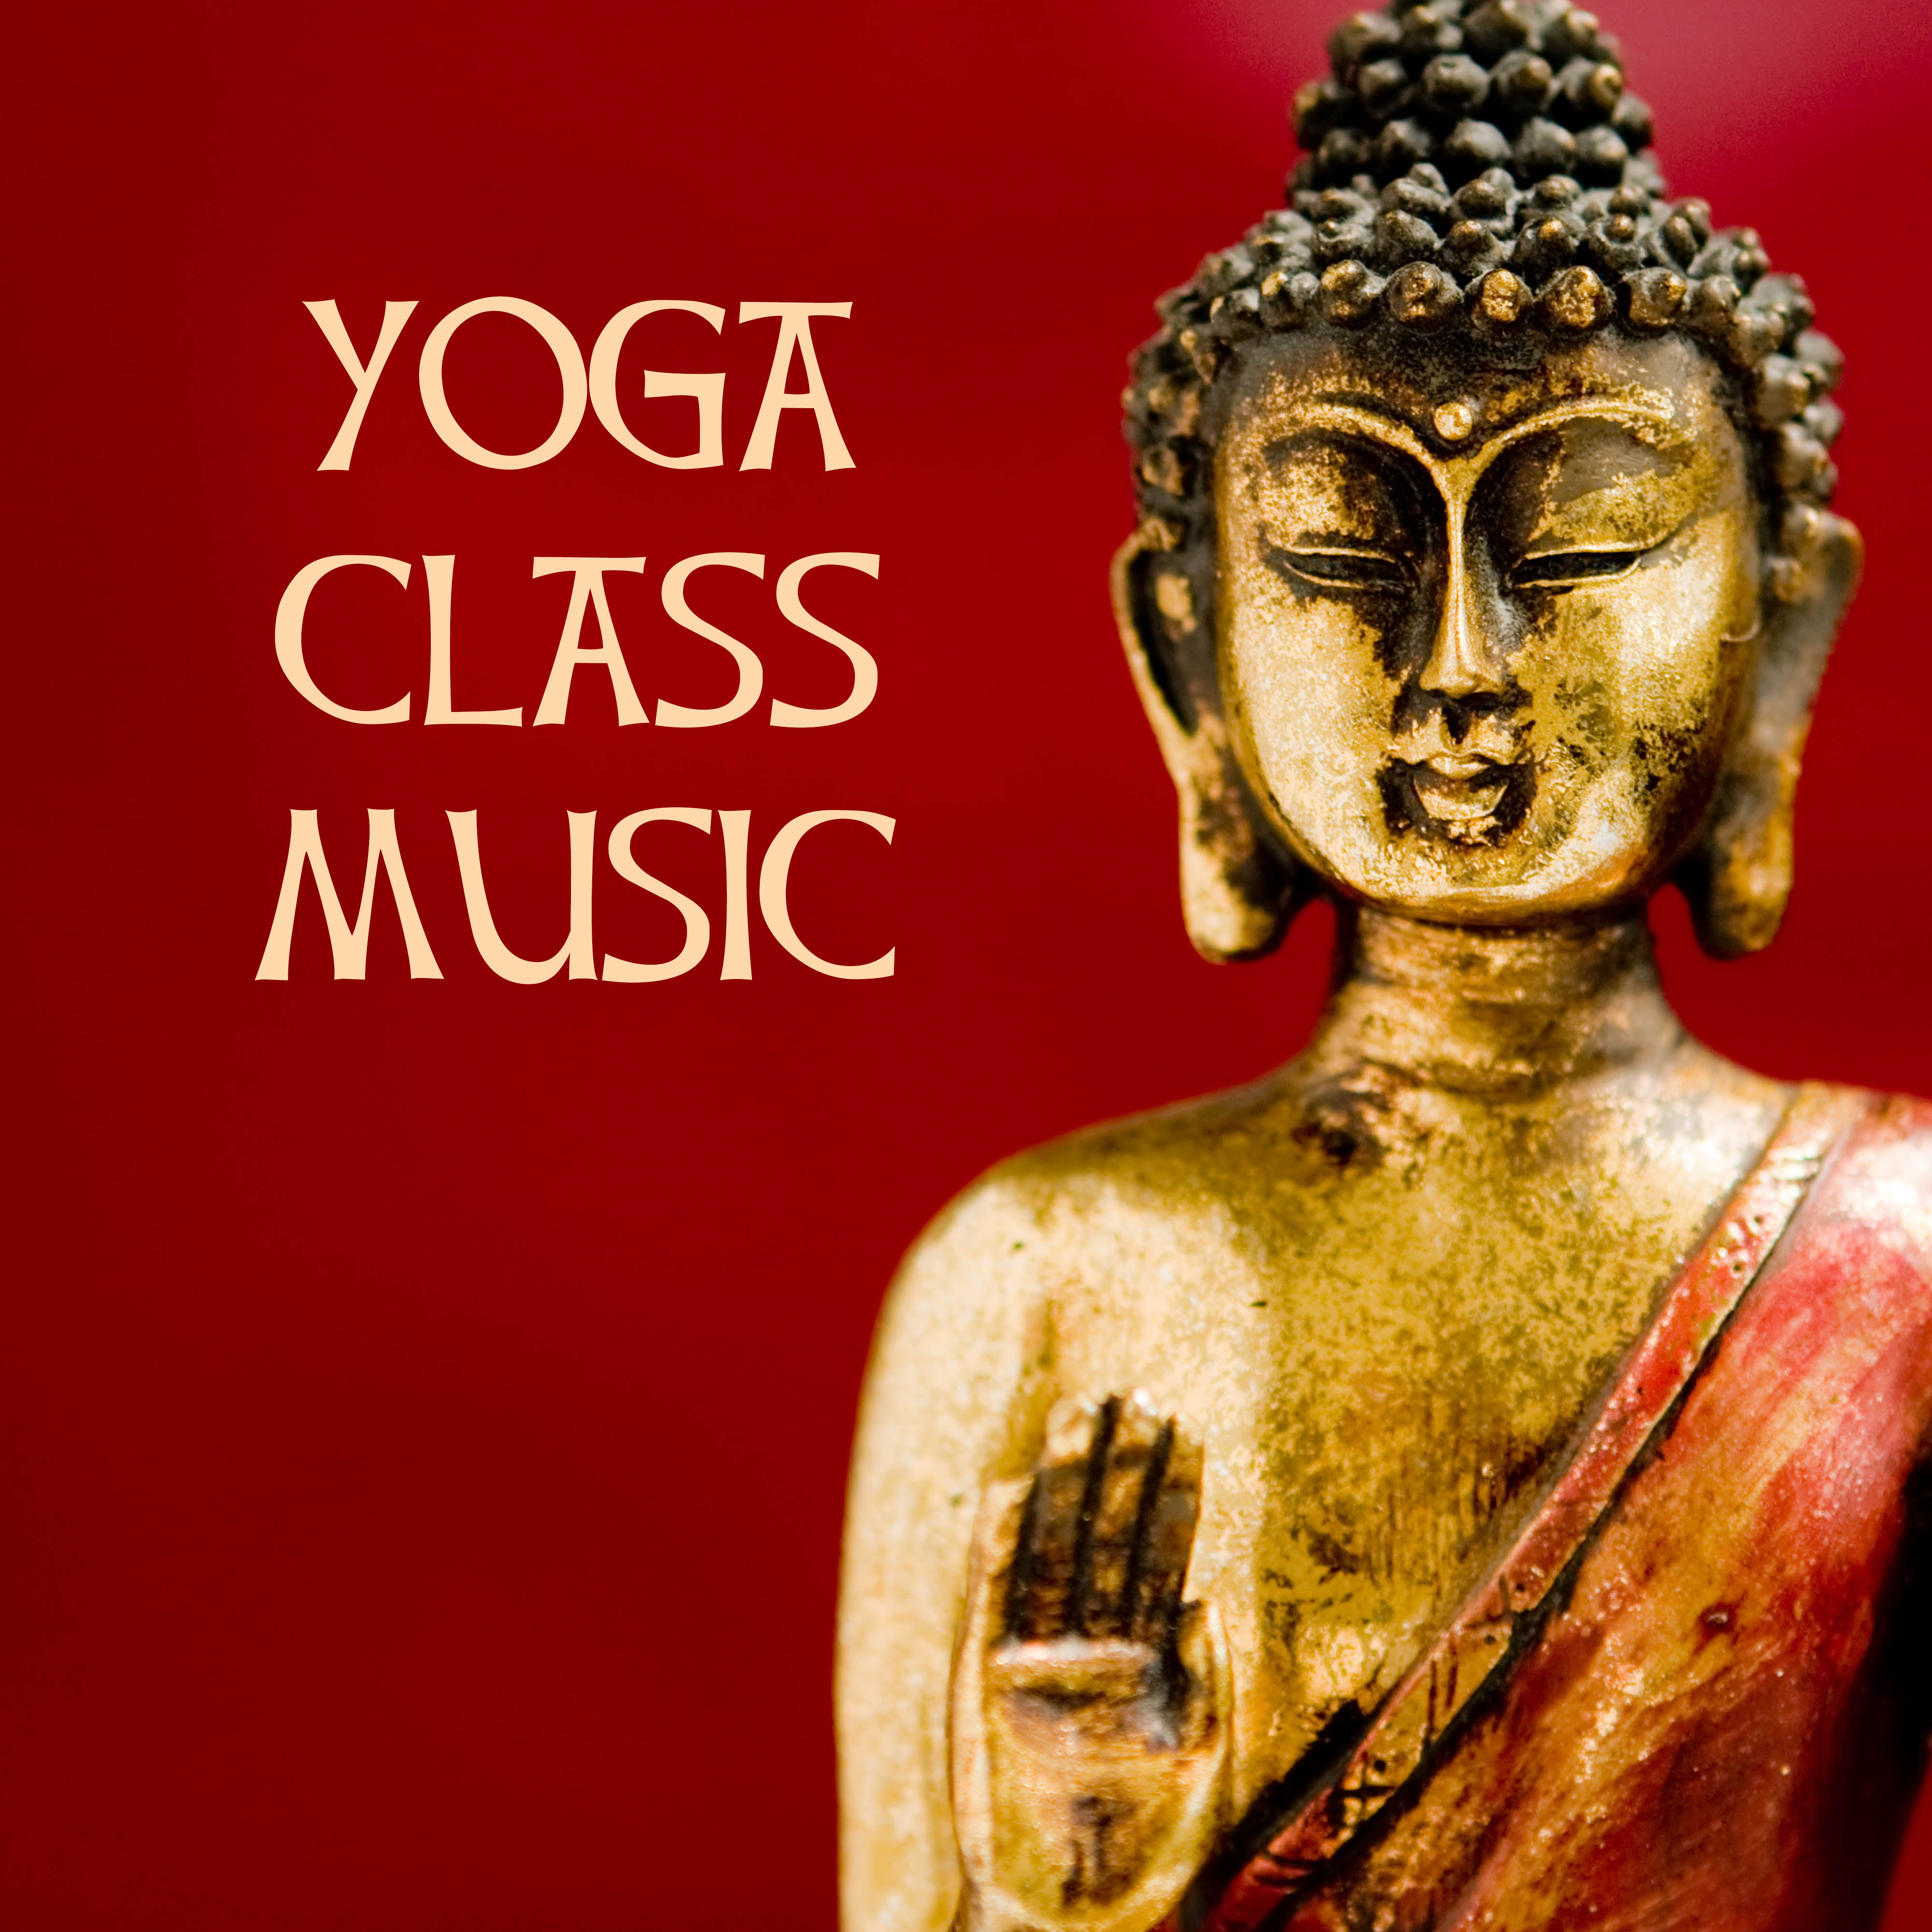 Yoga Music for Yoga Class - Best 30 Yoga Classes Songs Selection